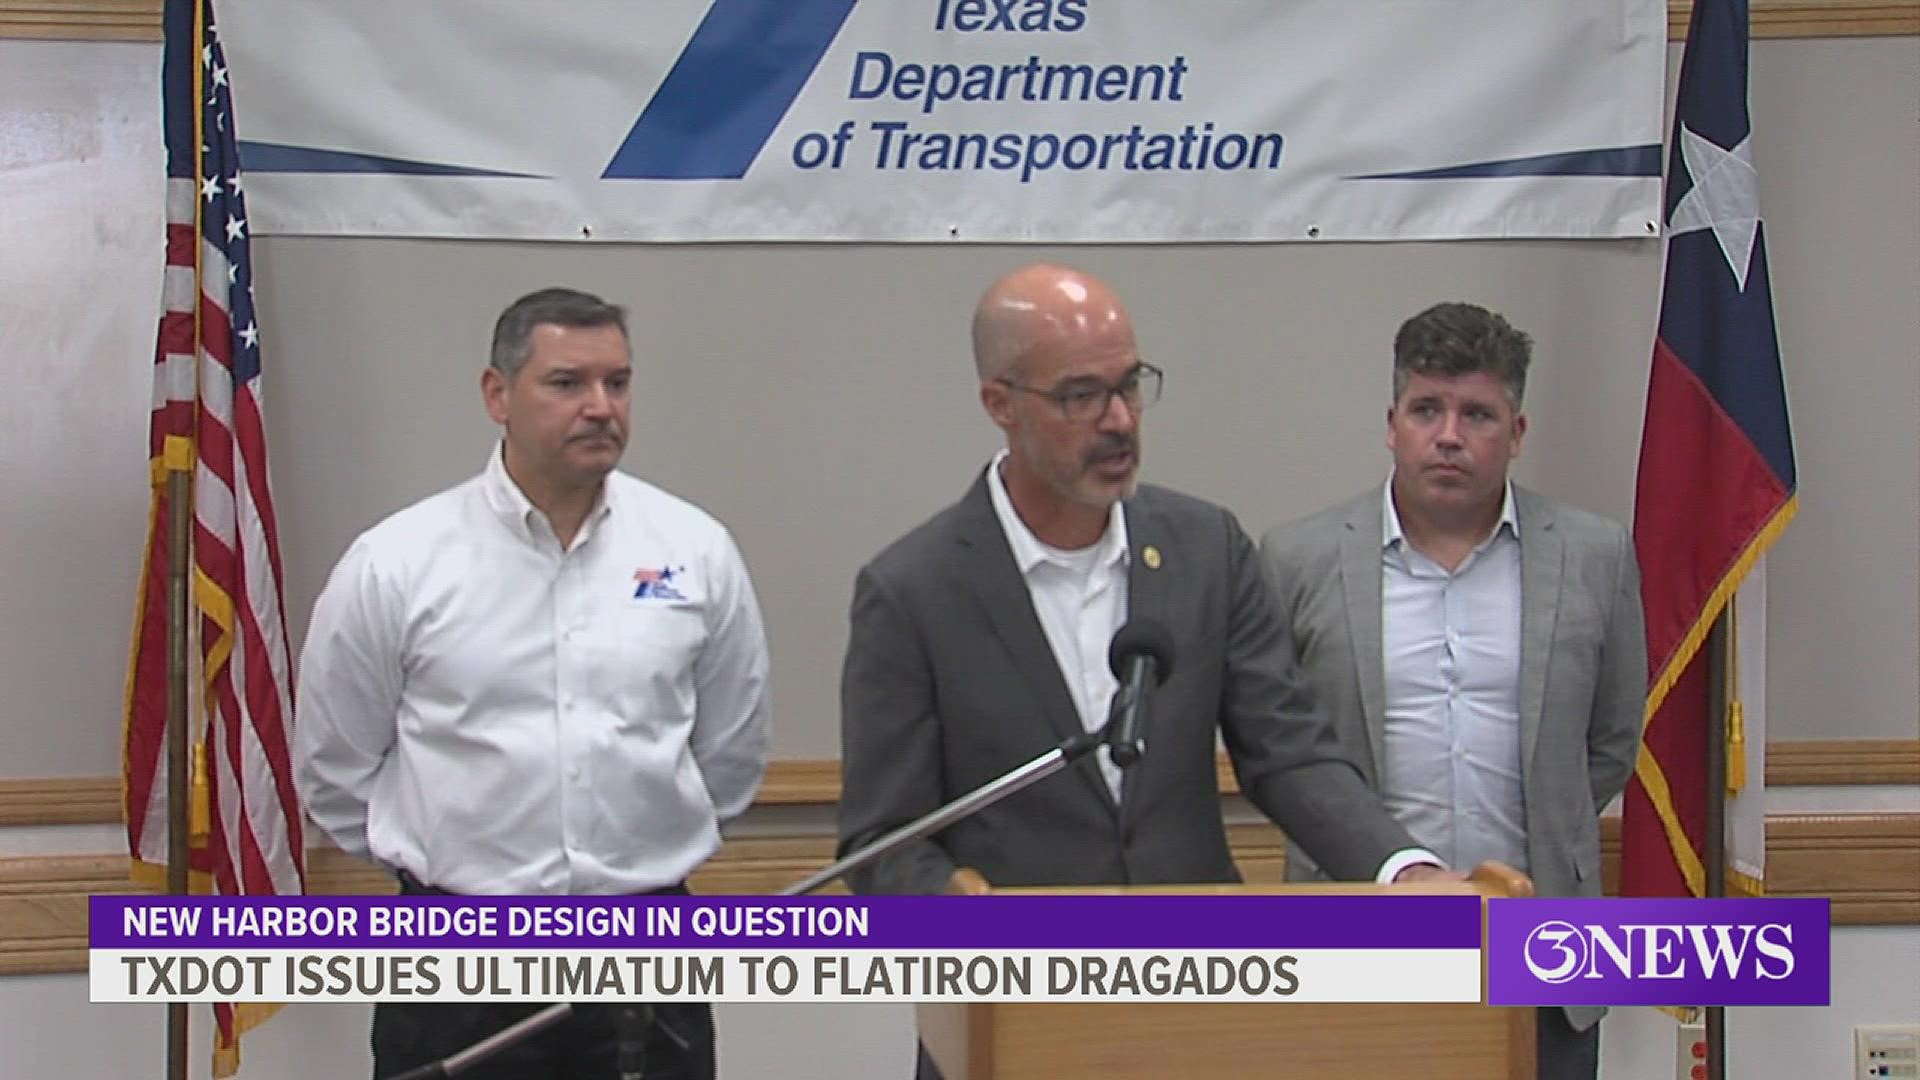 "This is unfortunate, disappointing and unacceptable," Marc Williams from TxDOT said about Flatiron Dragados LLC's "lack of responsiveness" to safety concerns.